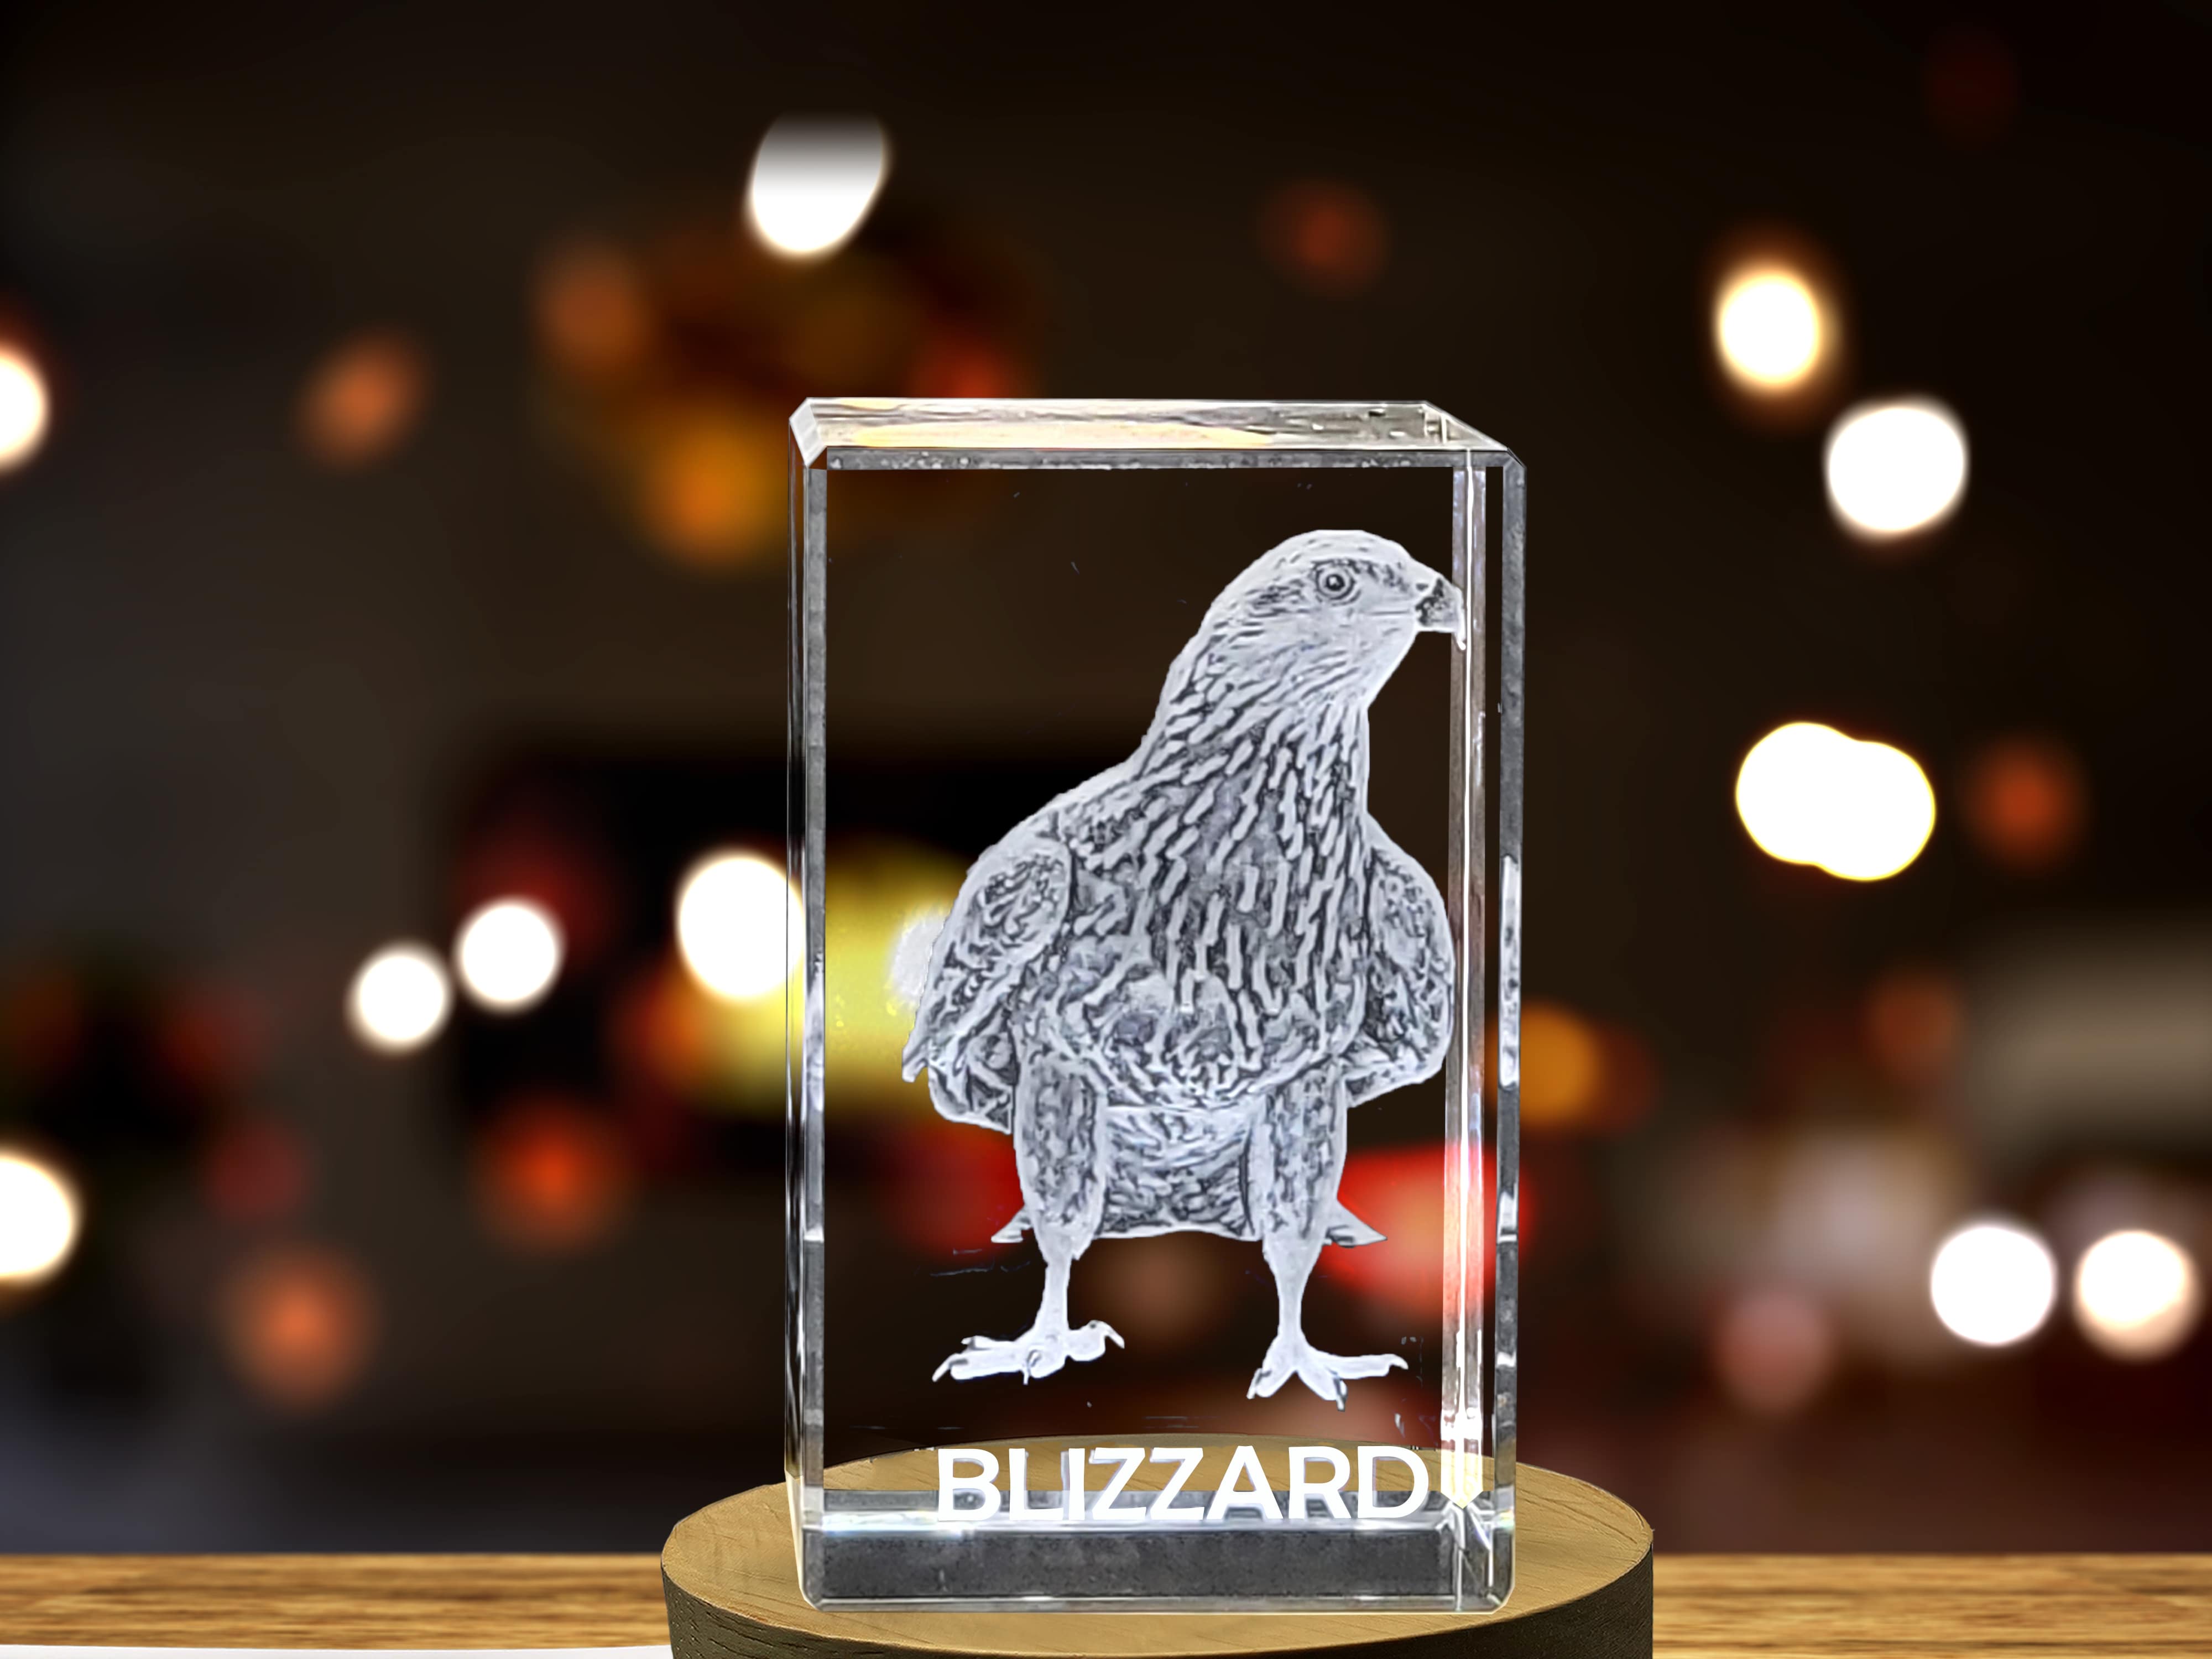 Unique 3D Engraved Crystal with Buzzard Design - Perfect Gift for Bird Lovers A&B Crystal Collection